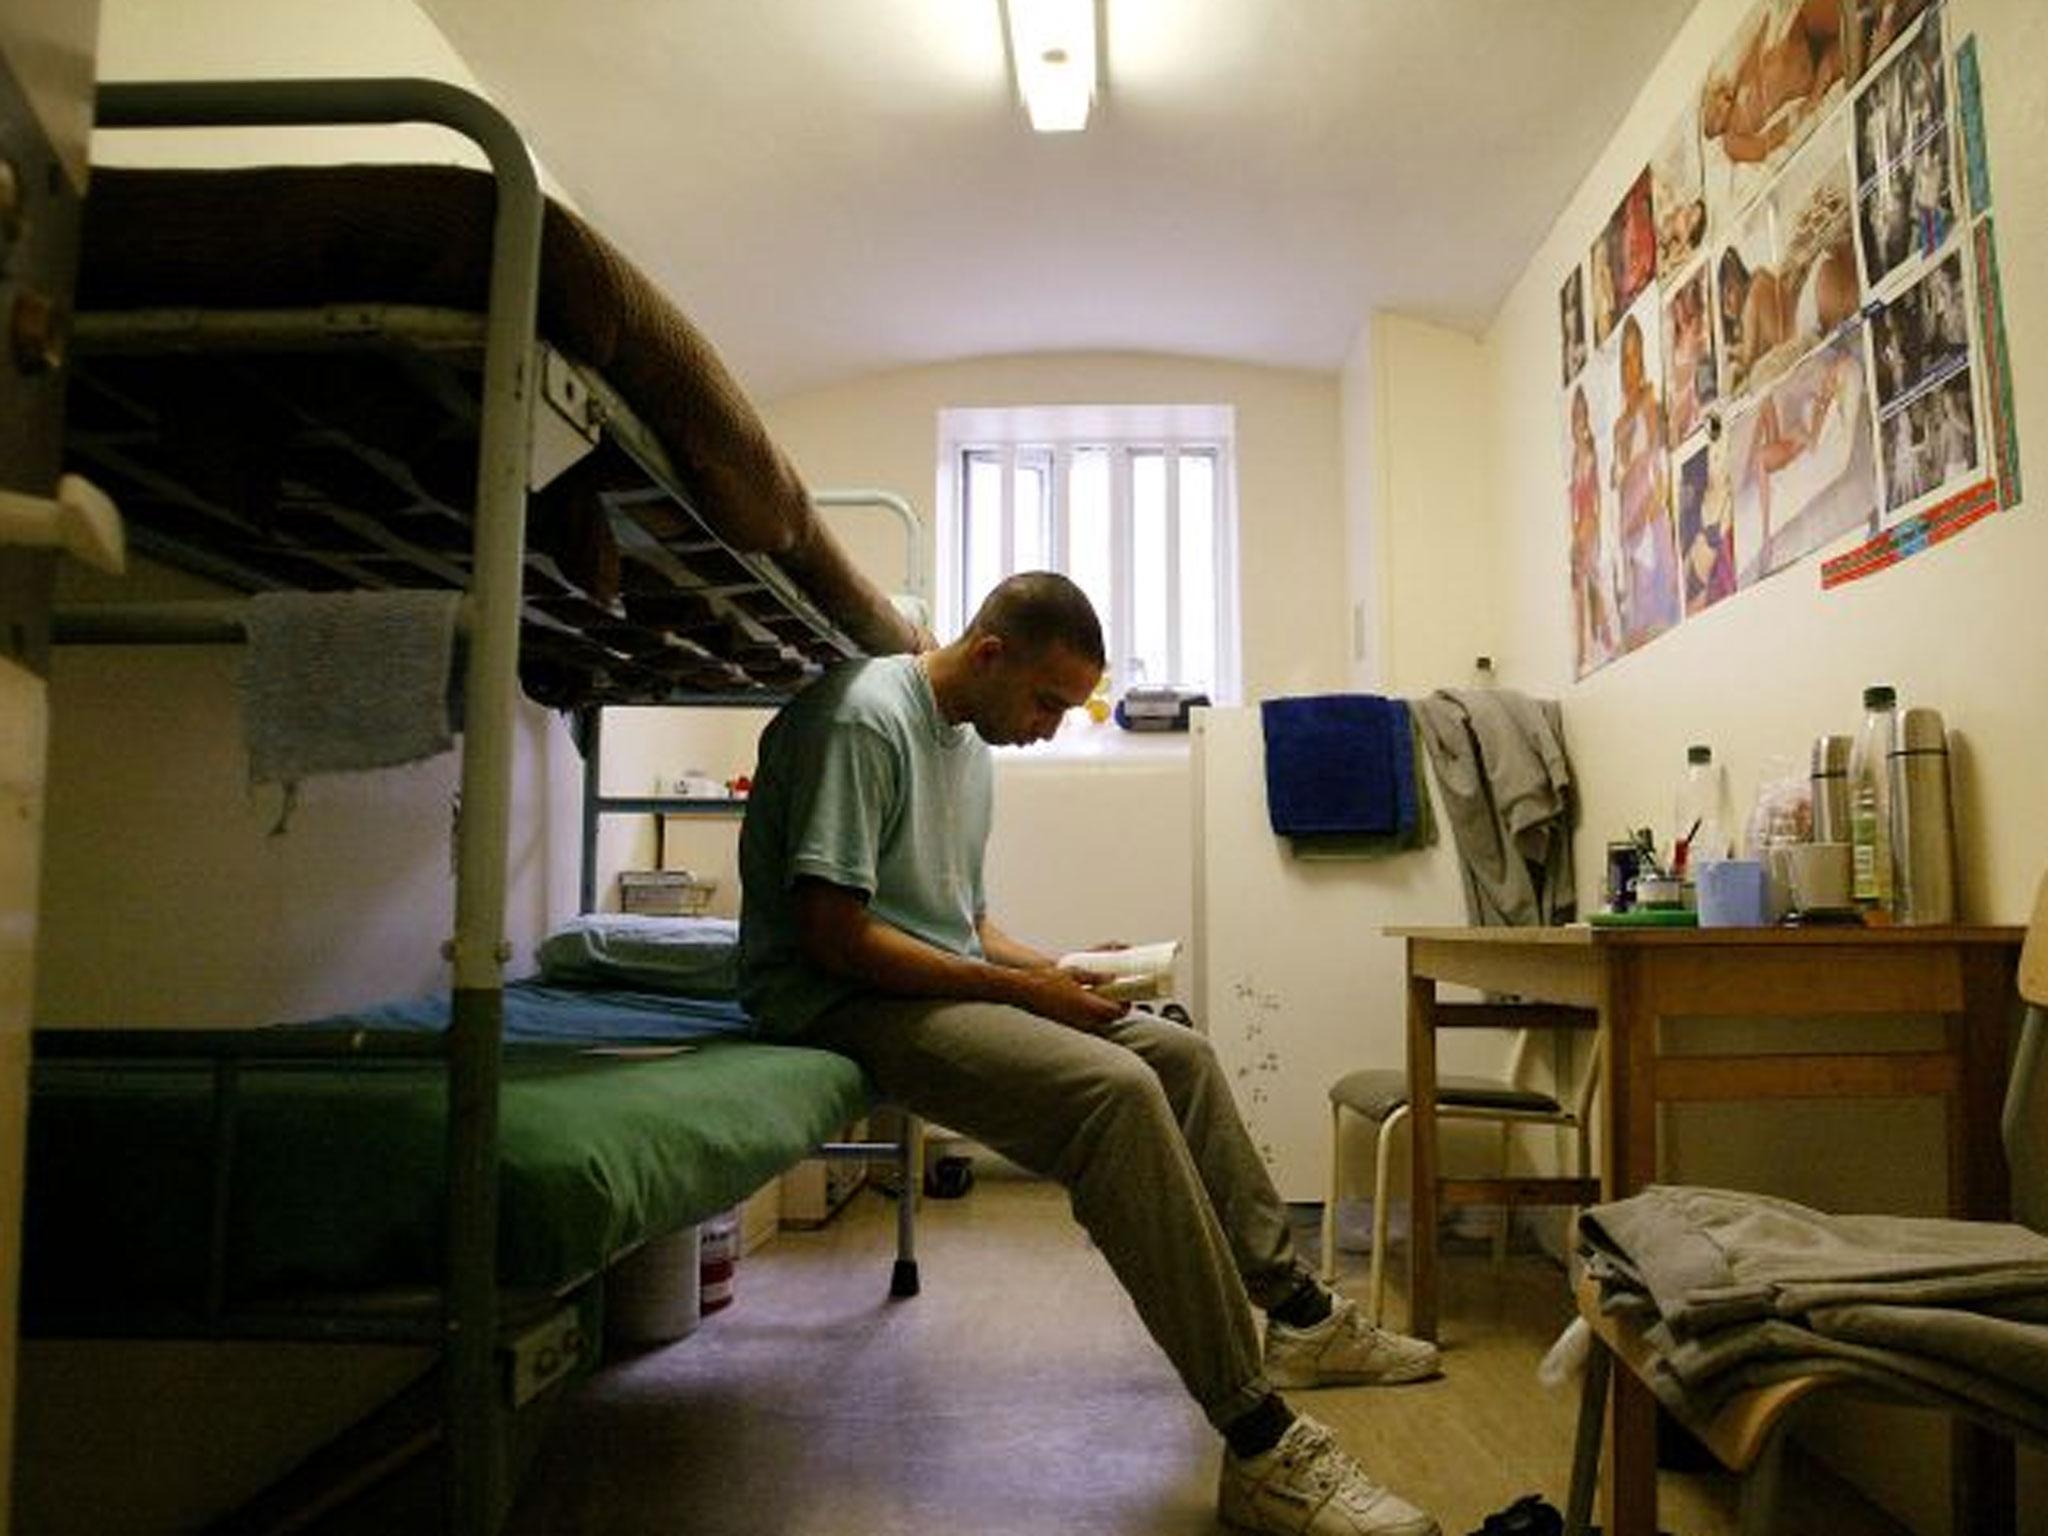 A prisoner reads a book in his cell at HMP Pentonville